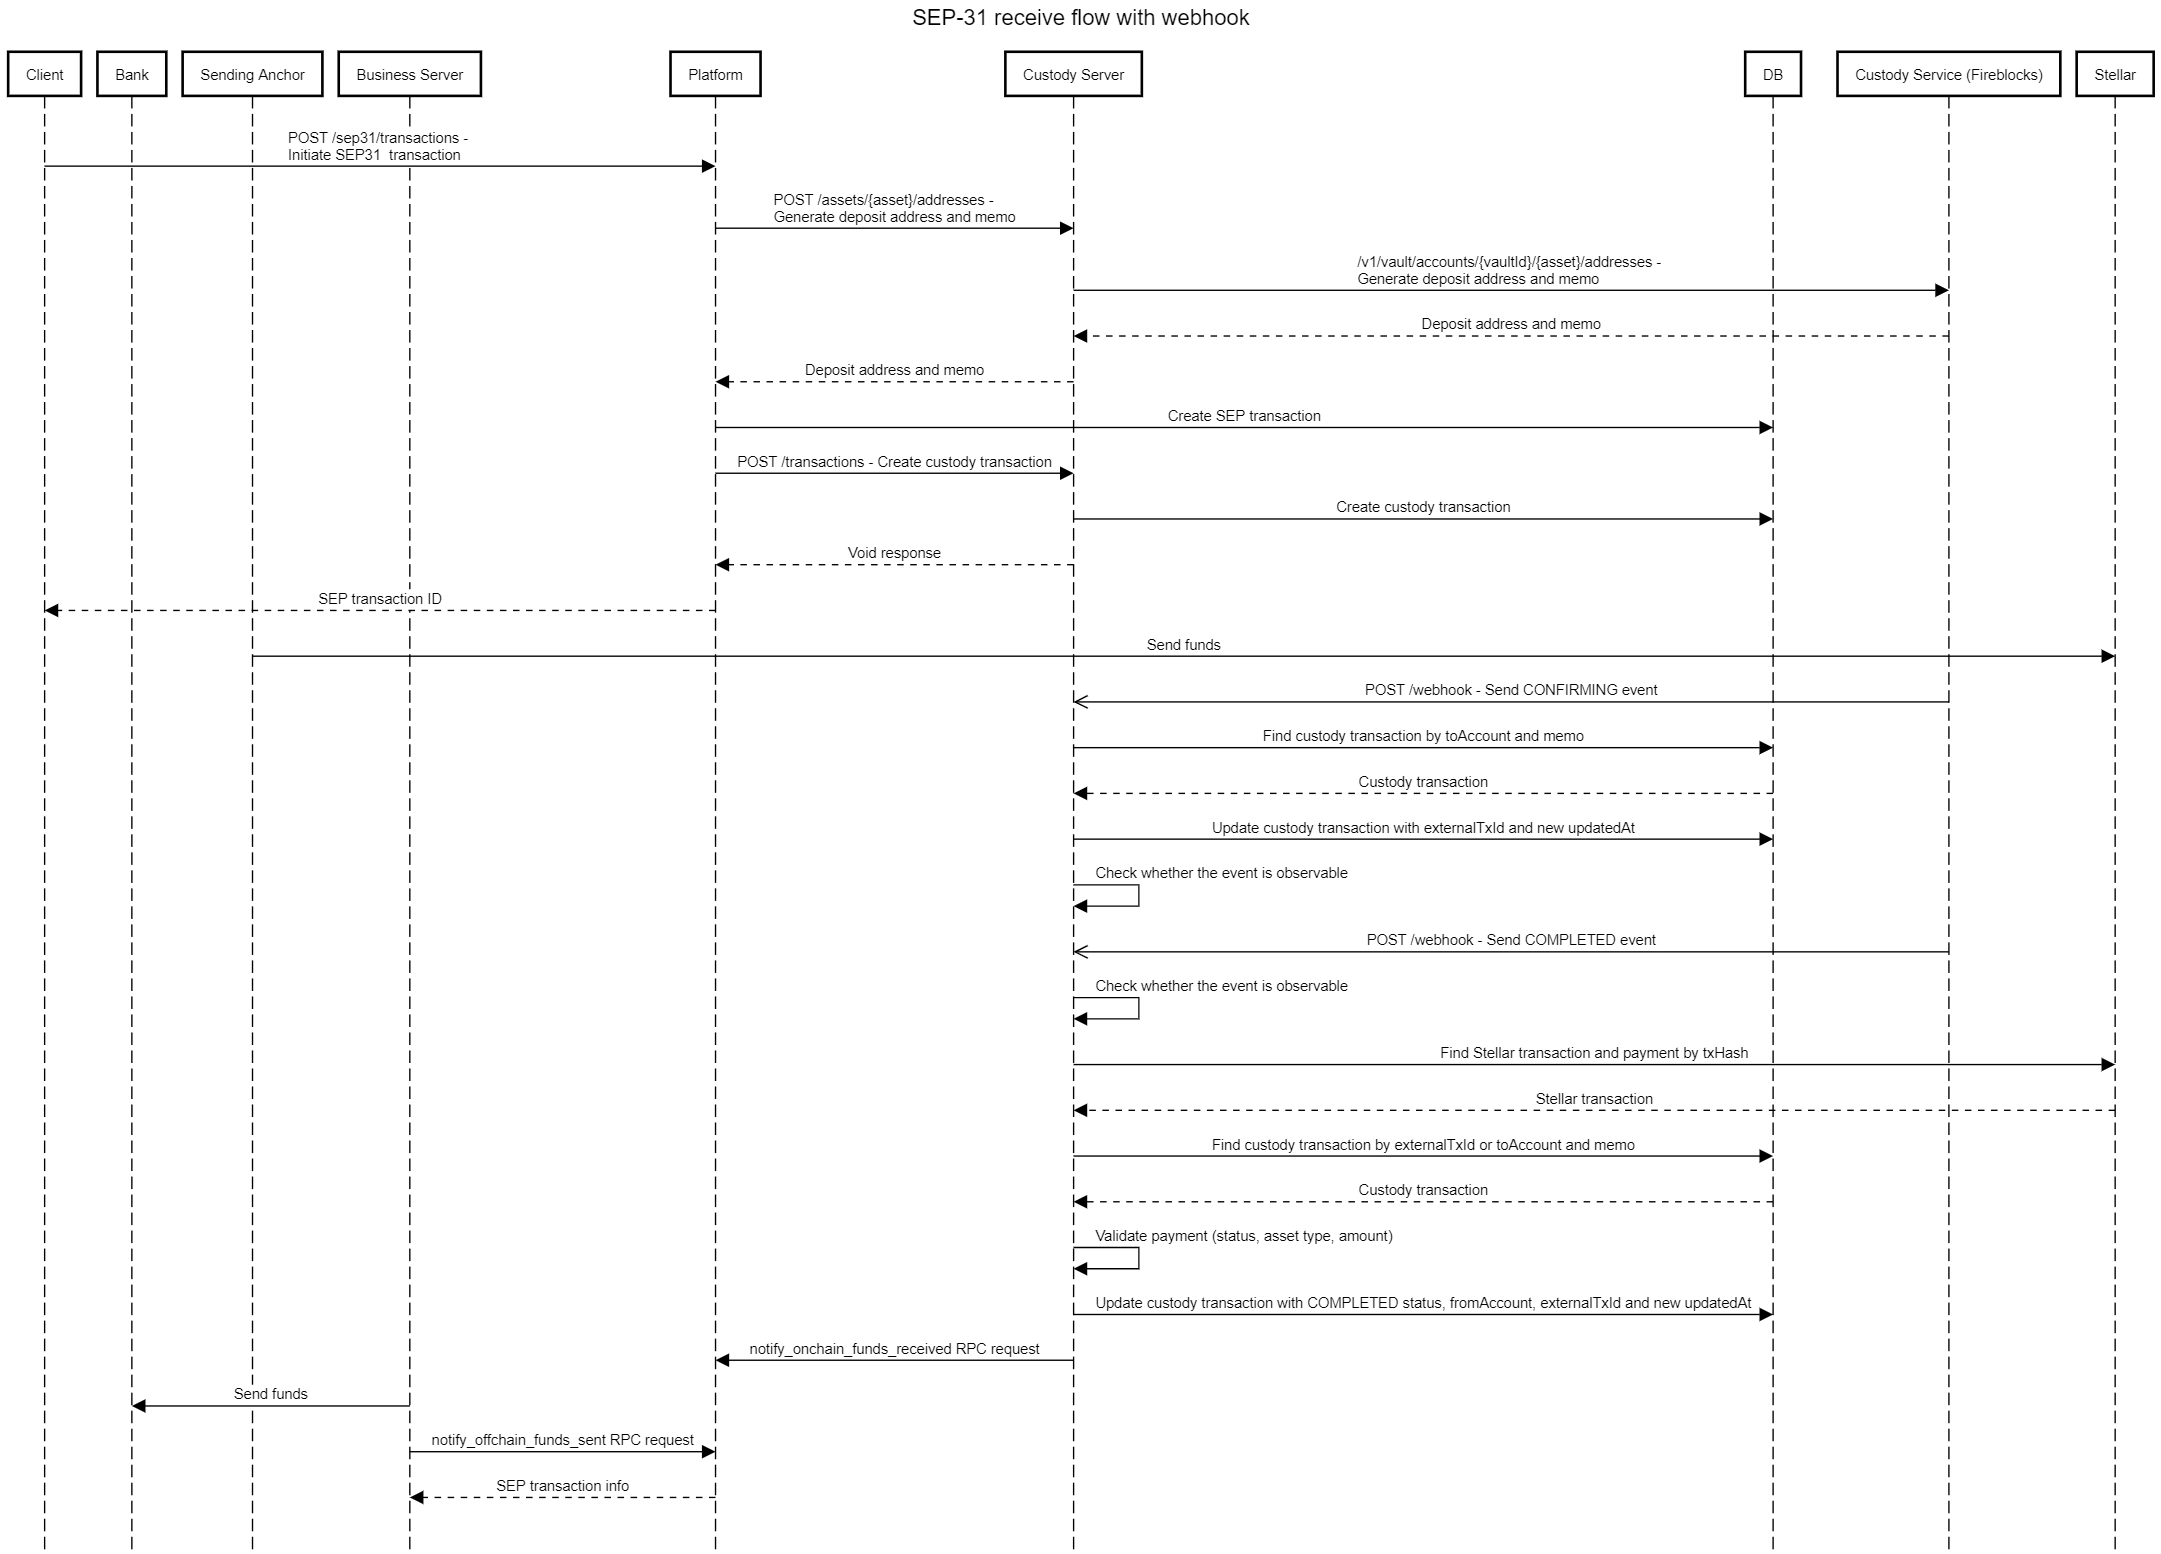 sequence_diagram_sep31_receive_webhook